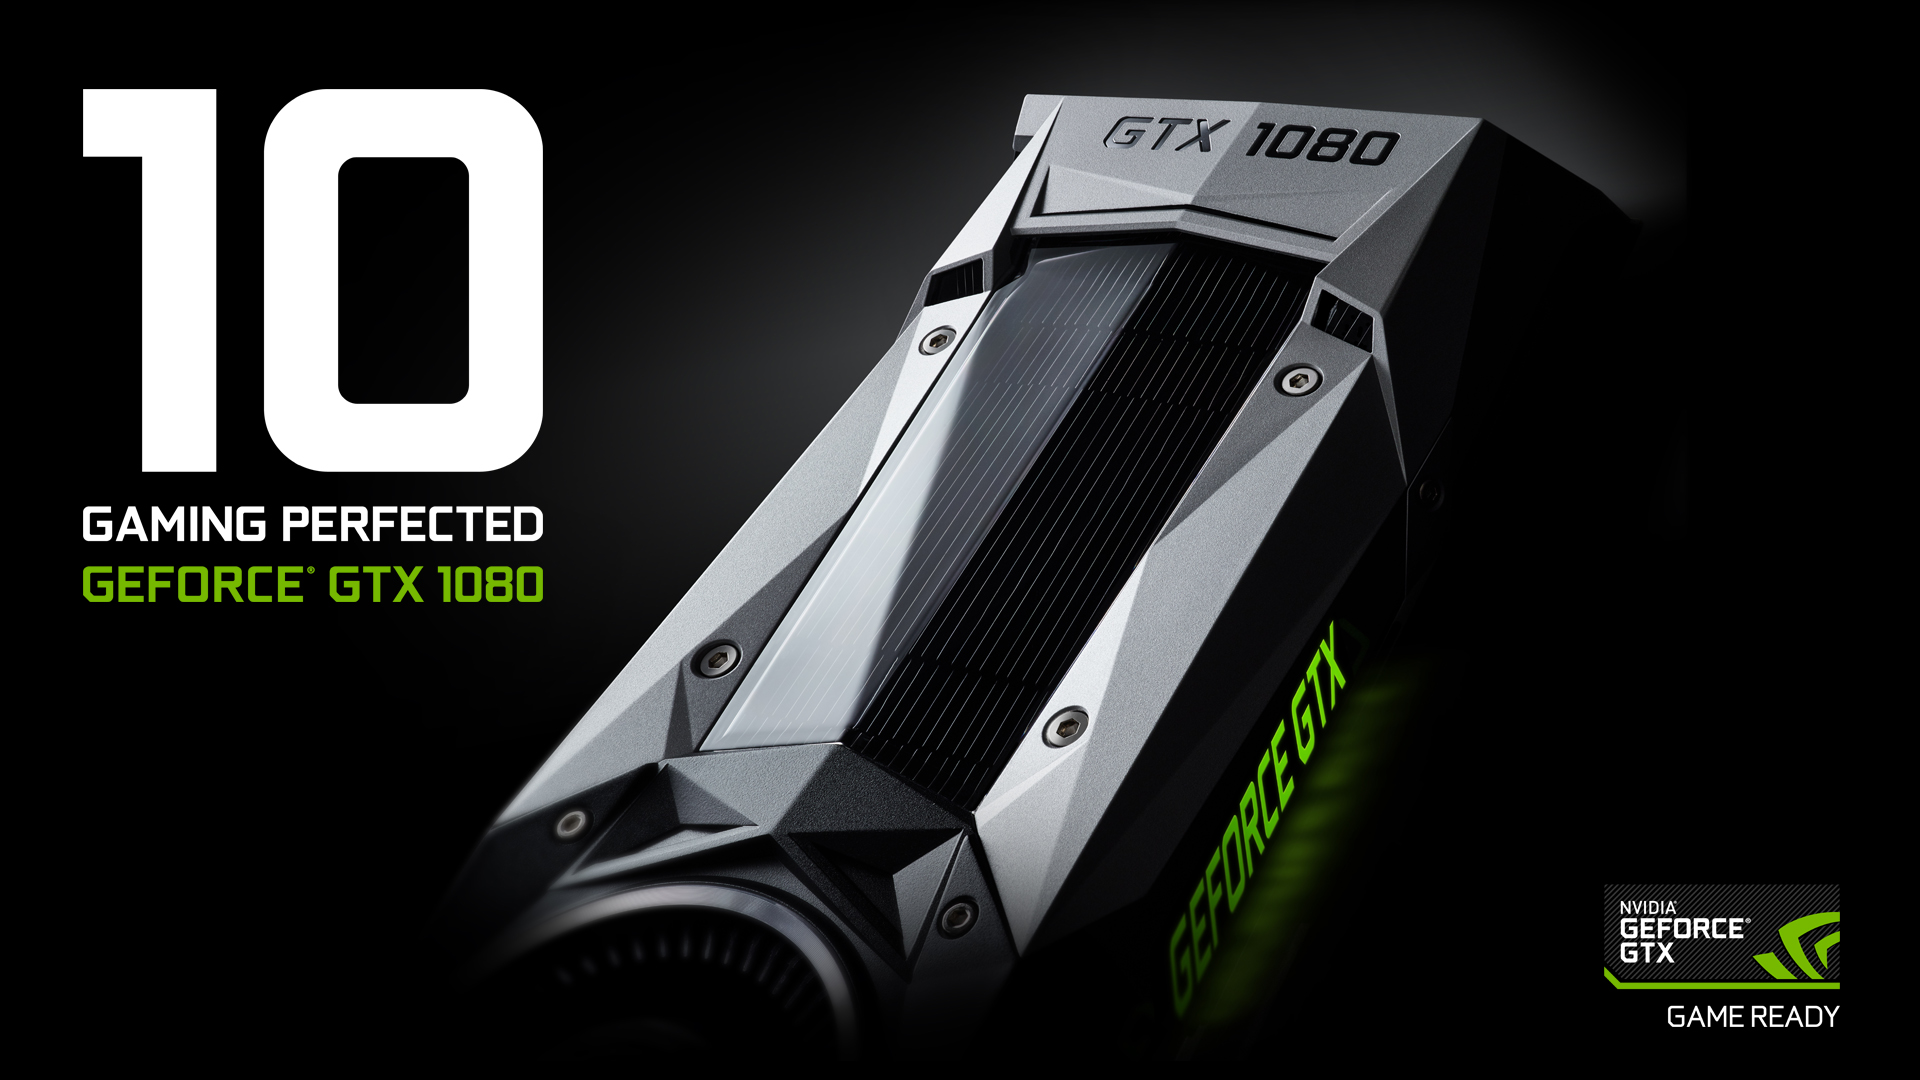 Introducing The GeForce GTX 1080: Gaming Perfected | GeForce